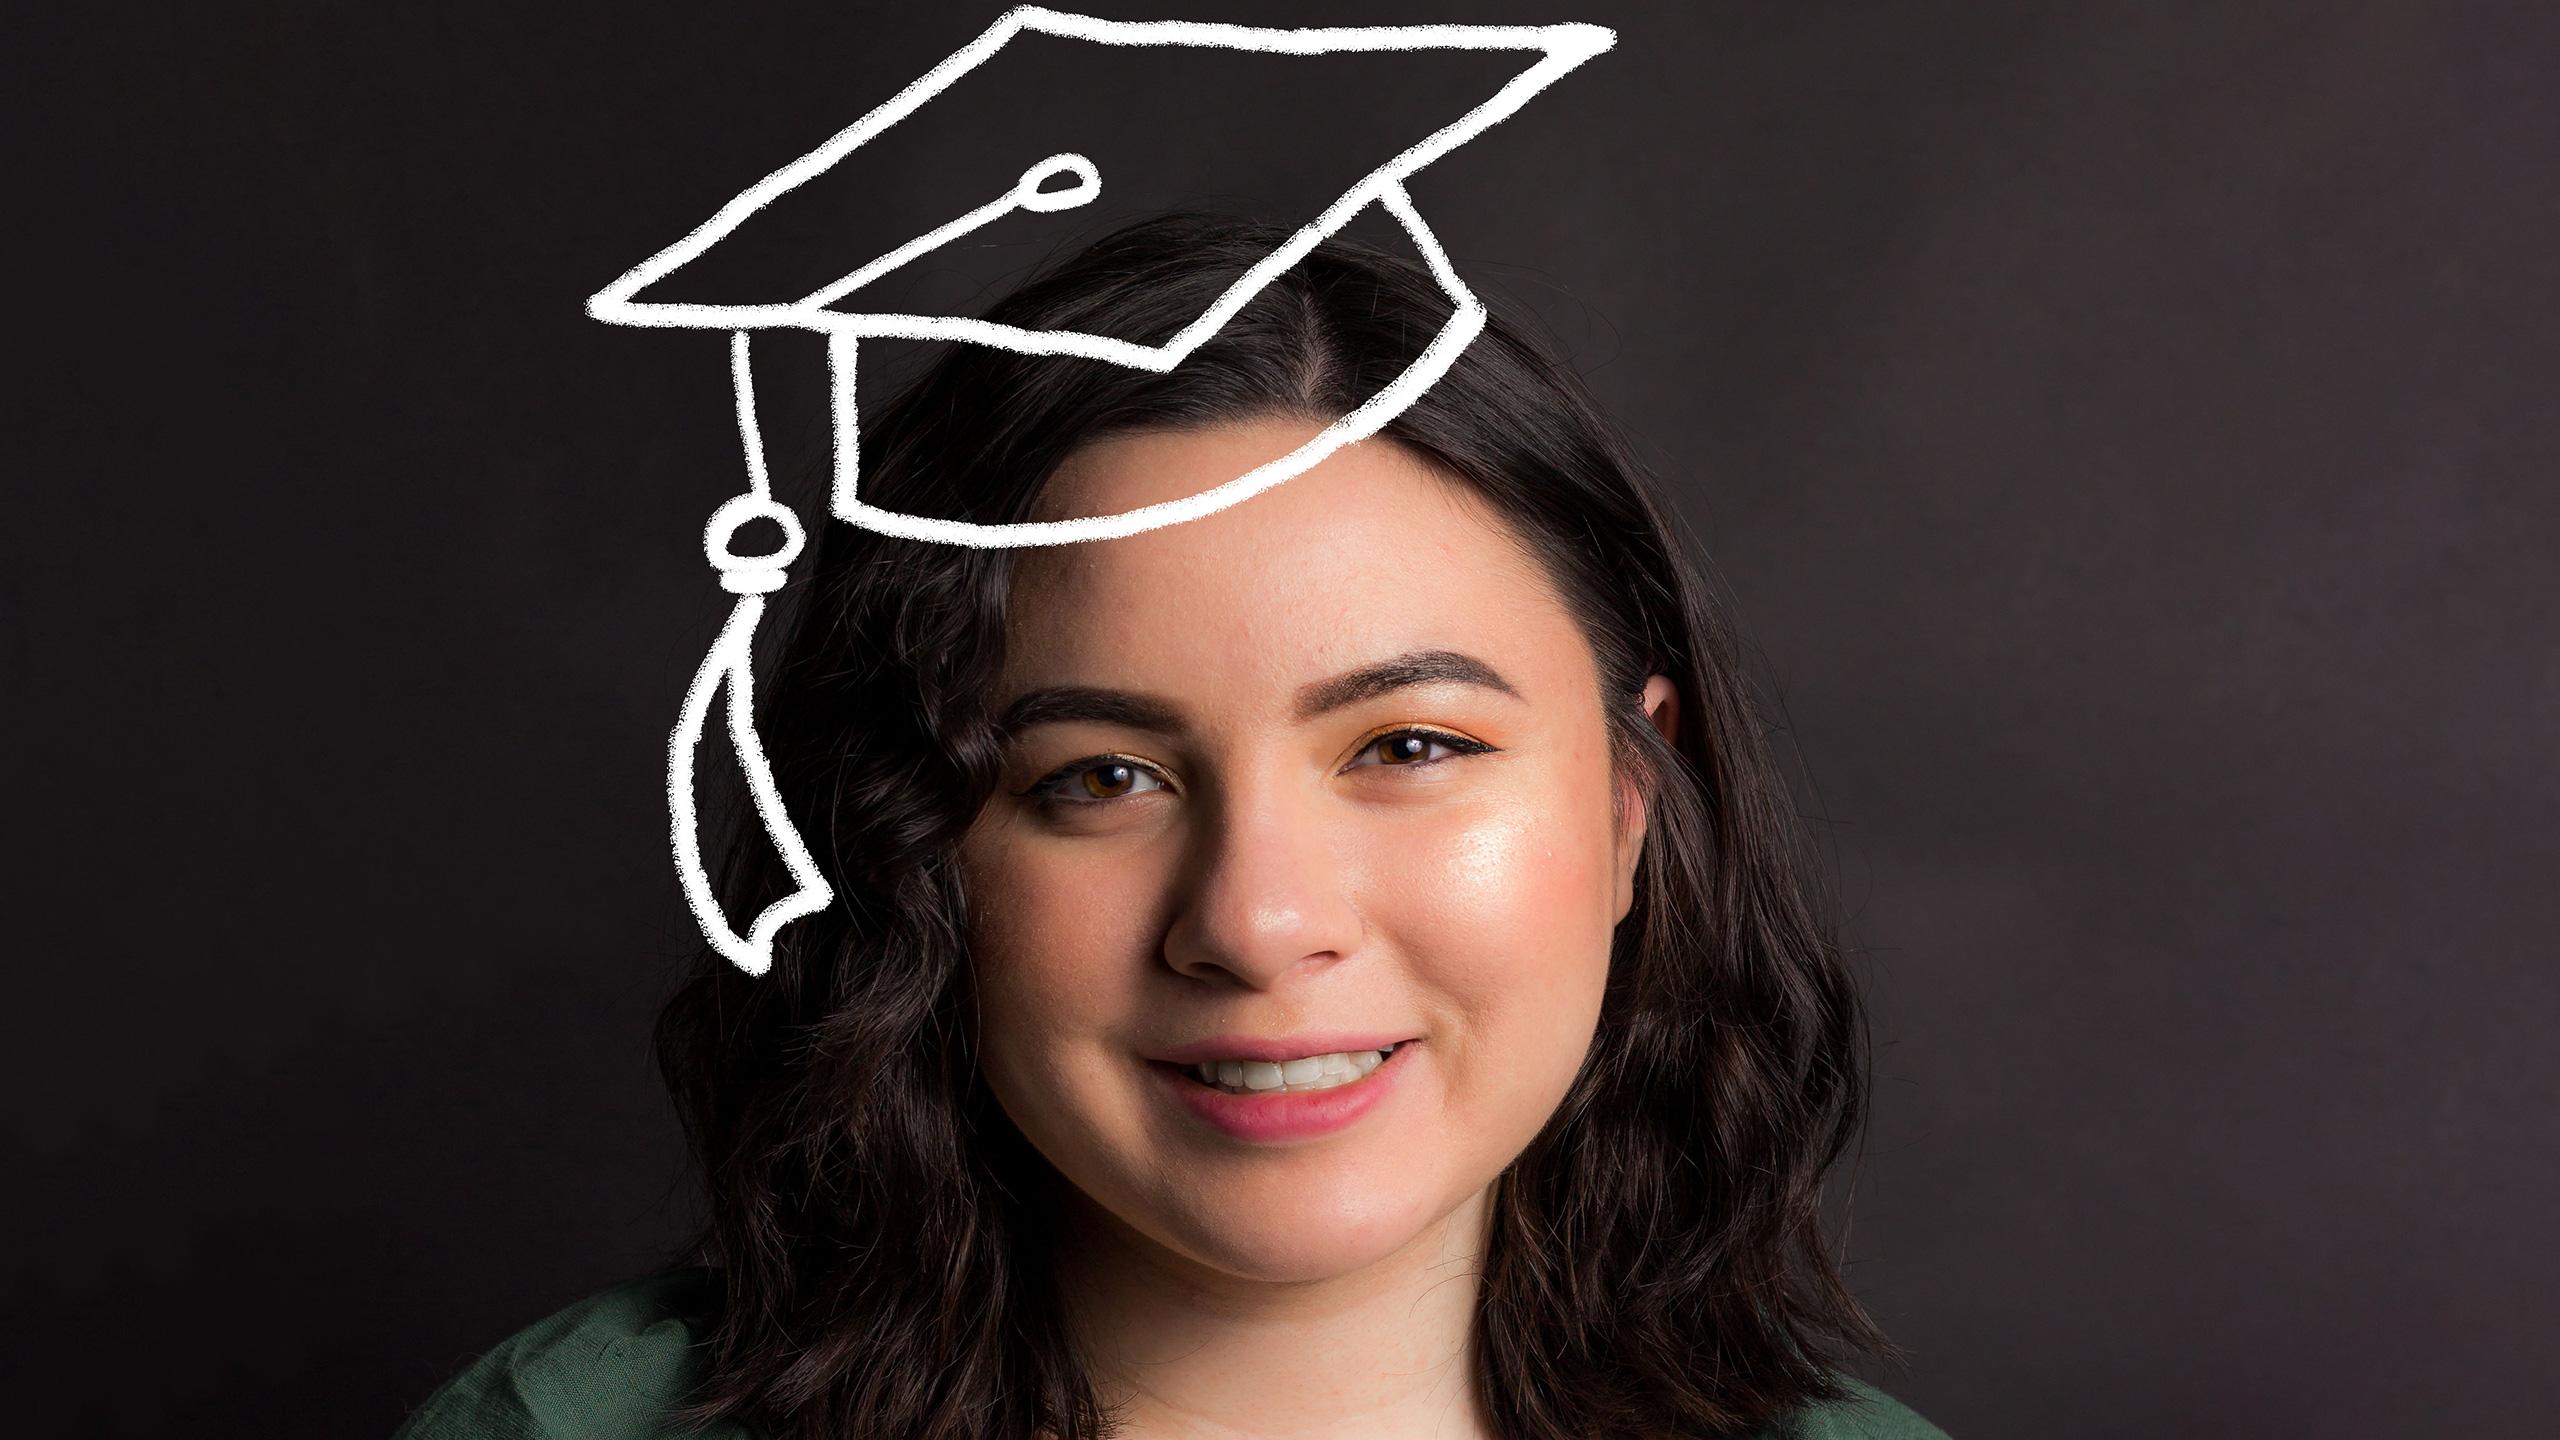 A young woman with a light complexion and dark, medium length-hair smiles at the camera. A graduation cap has been drawn over the photo on top of her head.